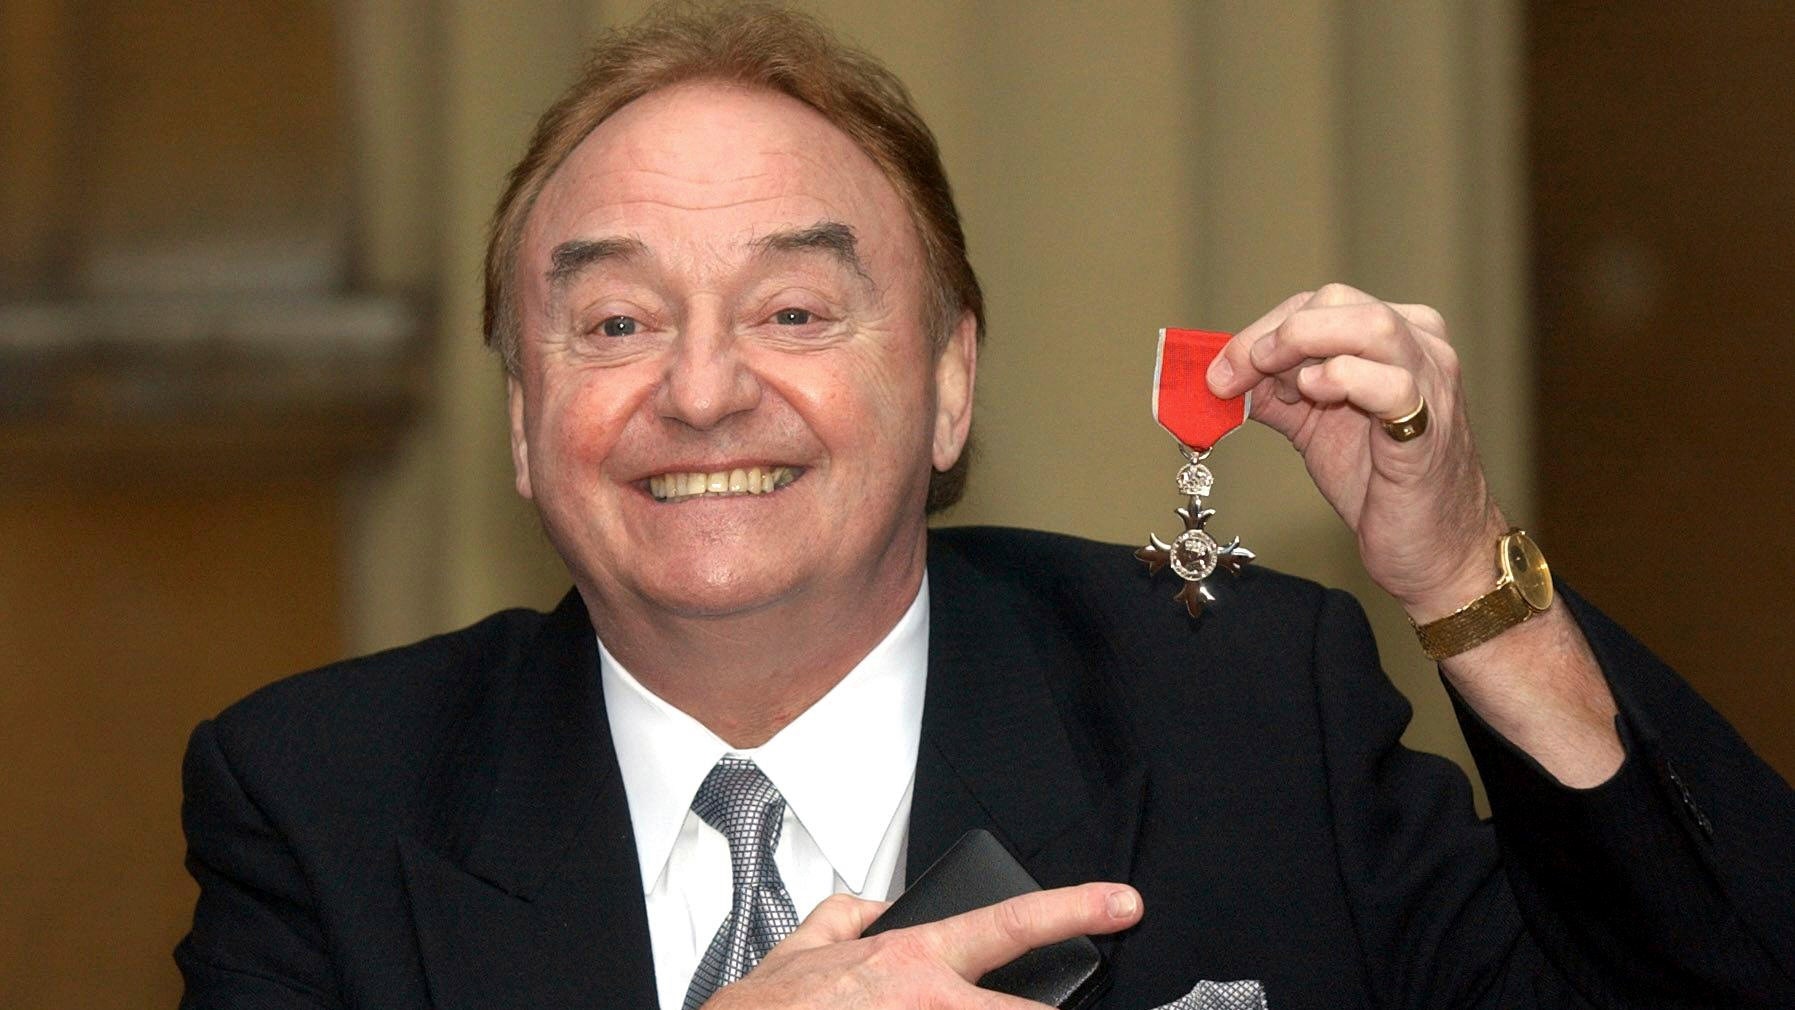 You Never Walk Alone singer Gerry Marsden dead at 78